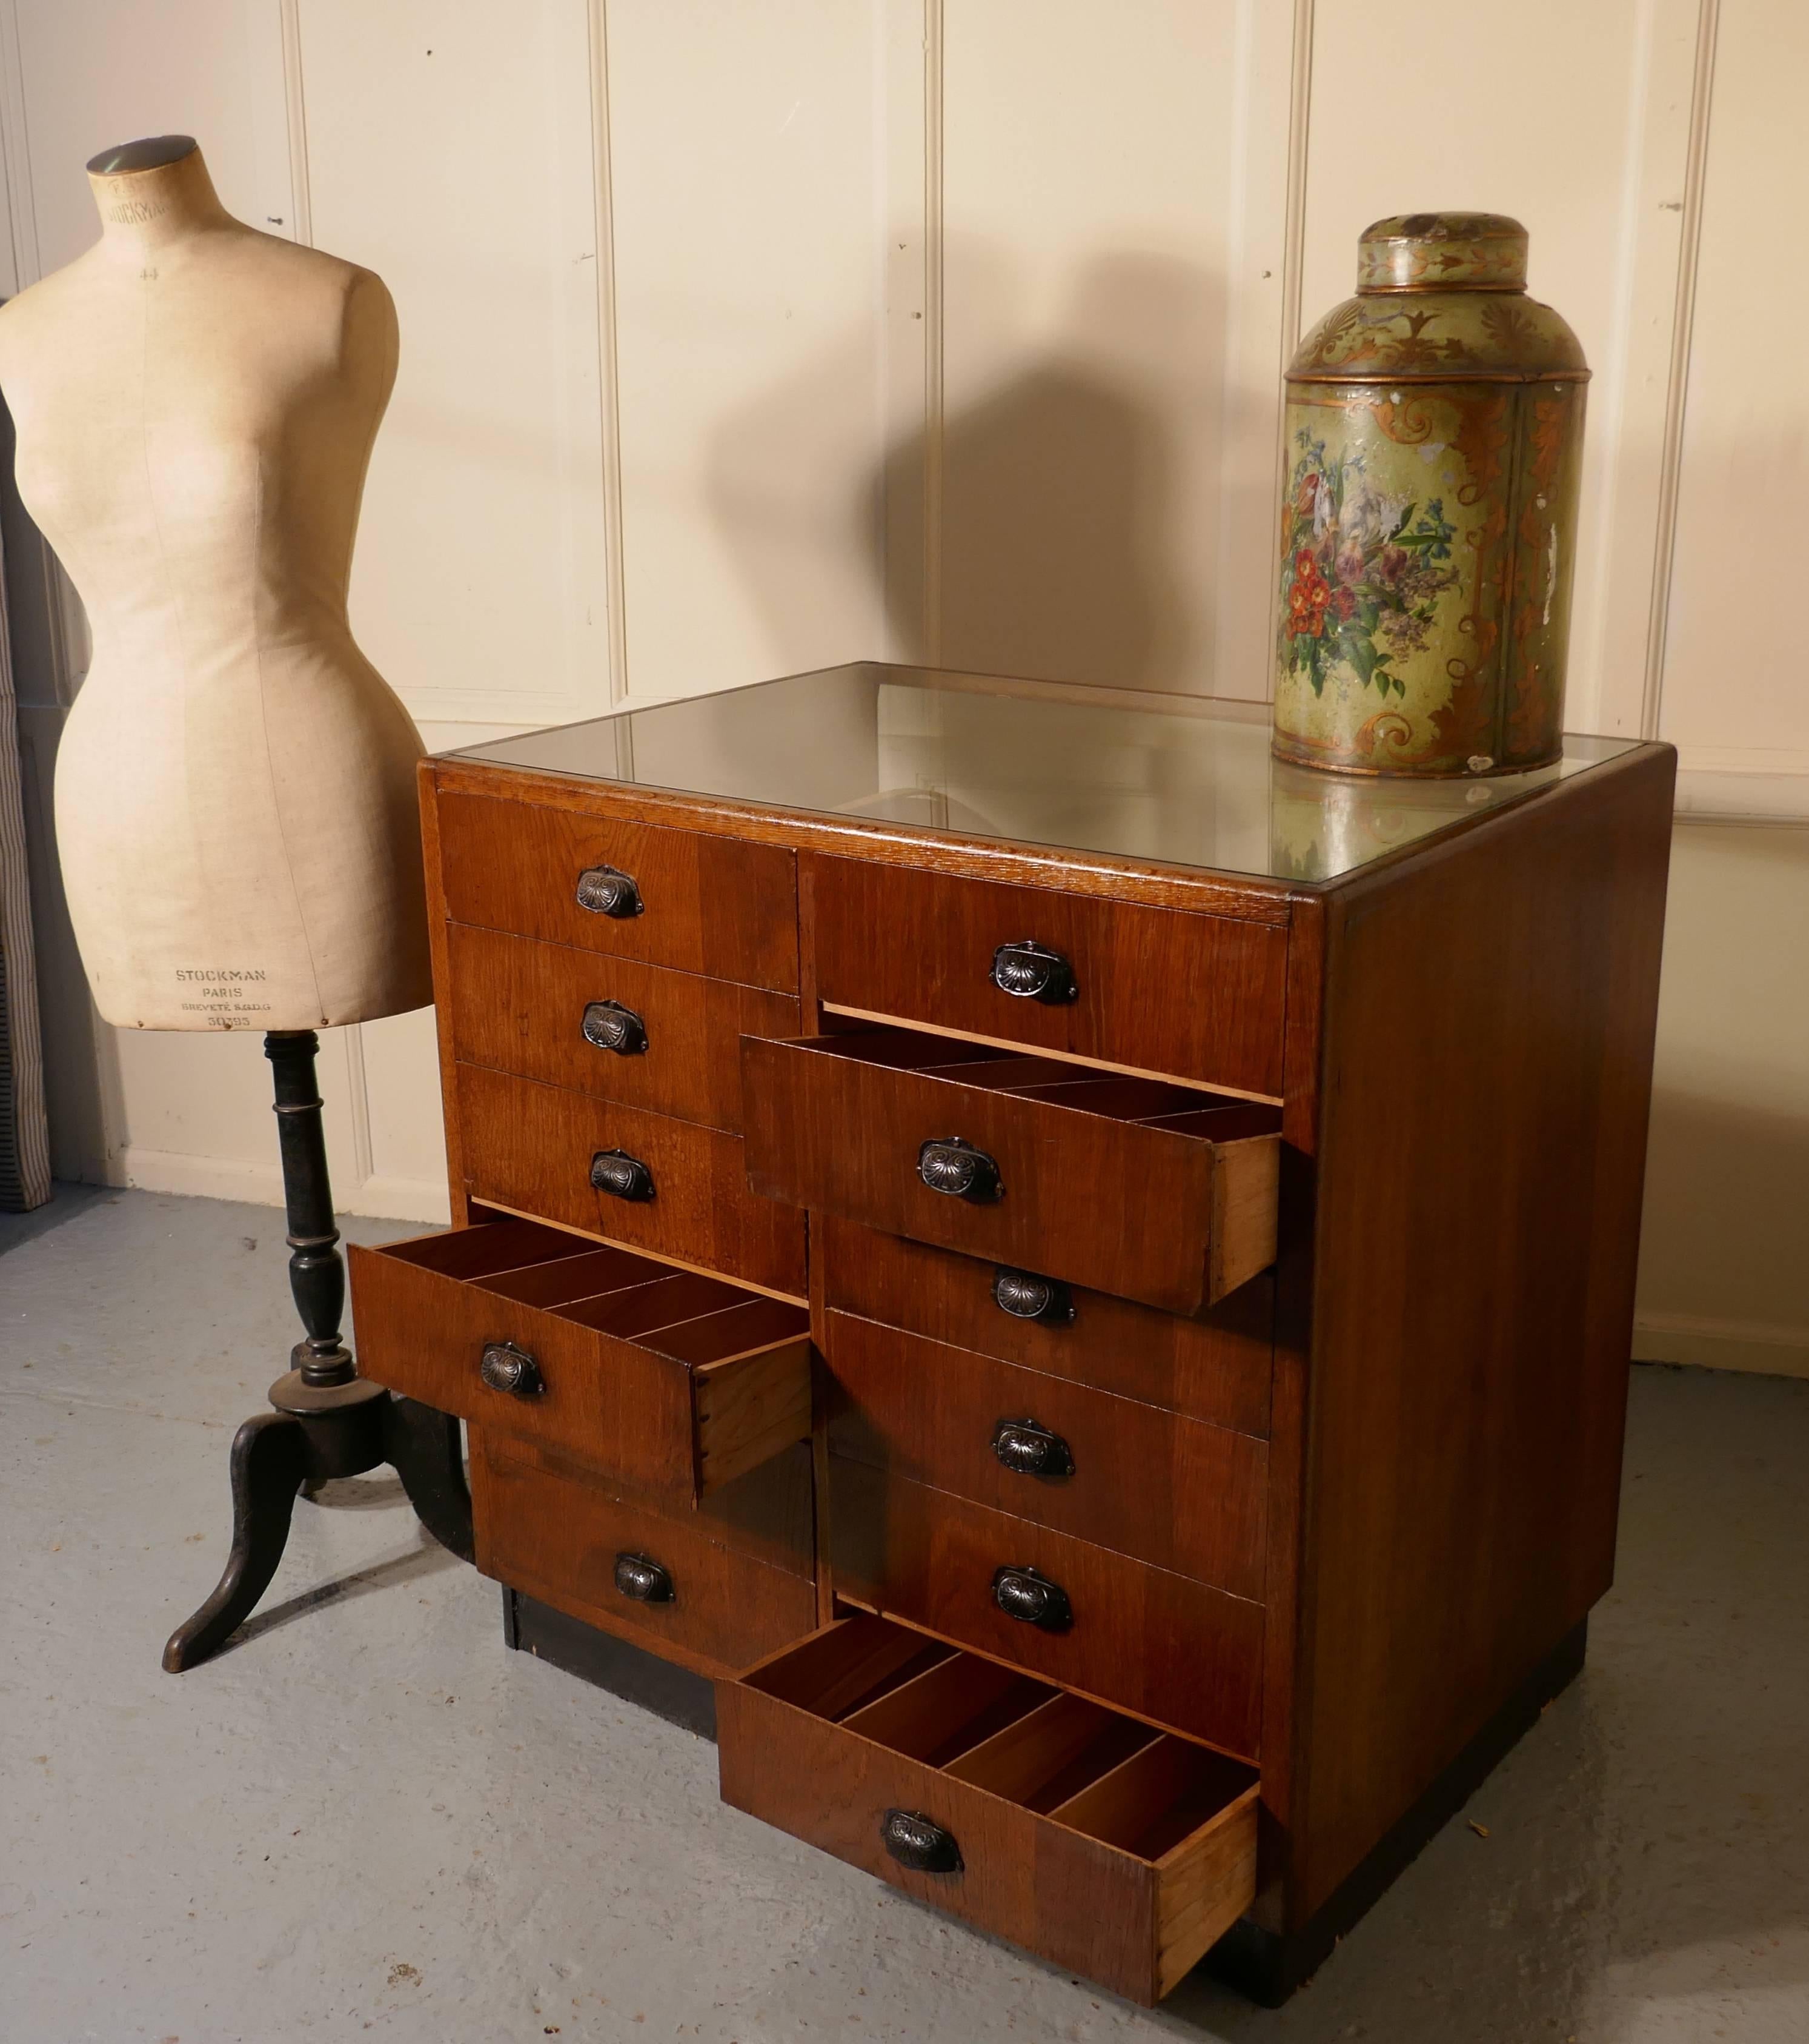 Vintage Art Deco Haberdashery shop fitting

The haberdashery shop counter is a lovely small size and has two banks each of six graduated drawers, there are removable dividers in the drawers, the cabinet is made in light oak, with a curved Odeon